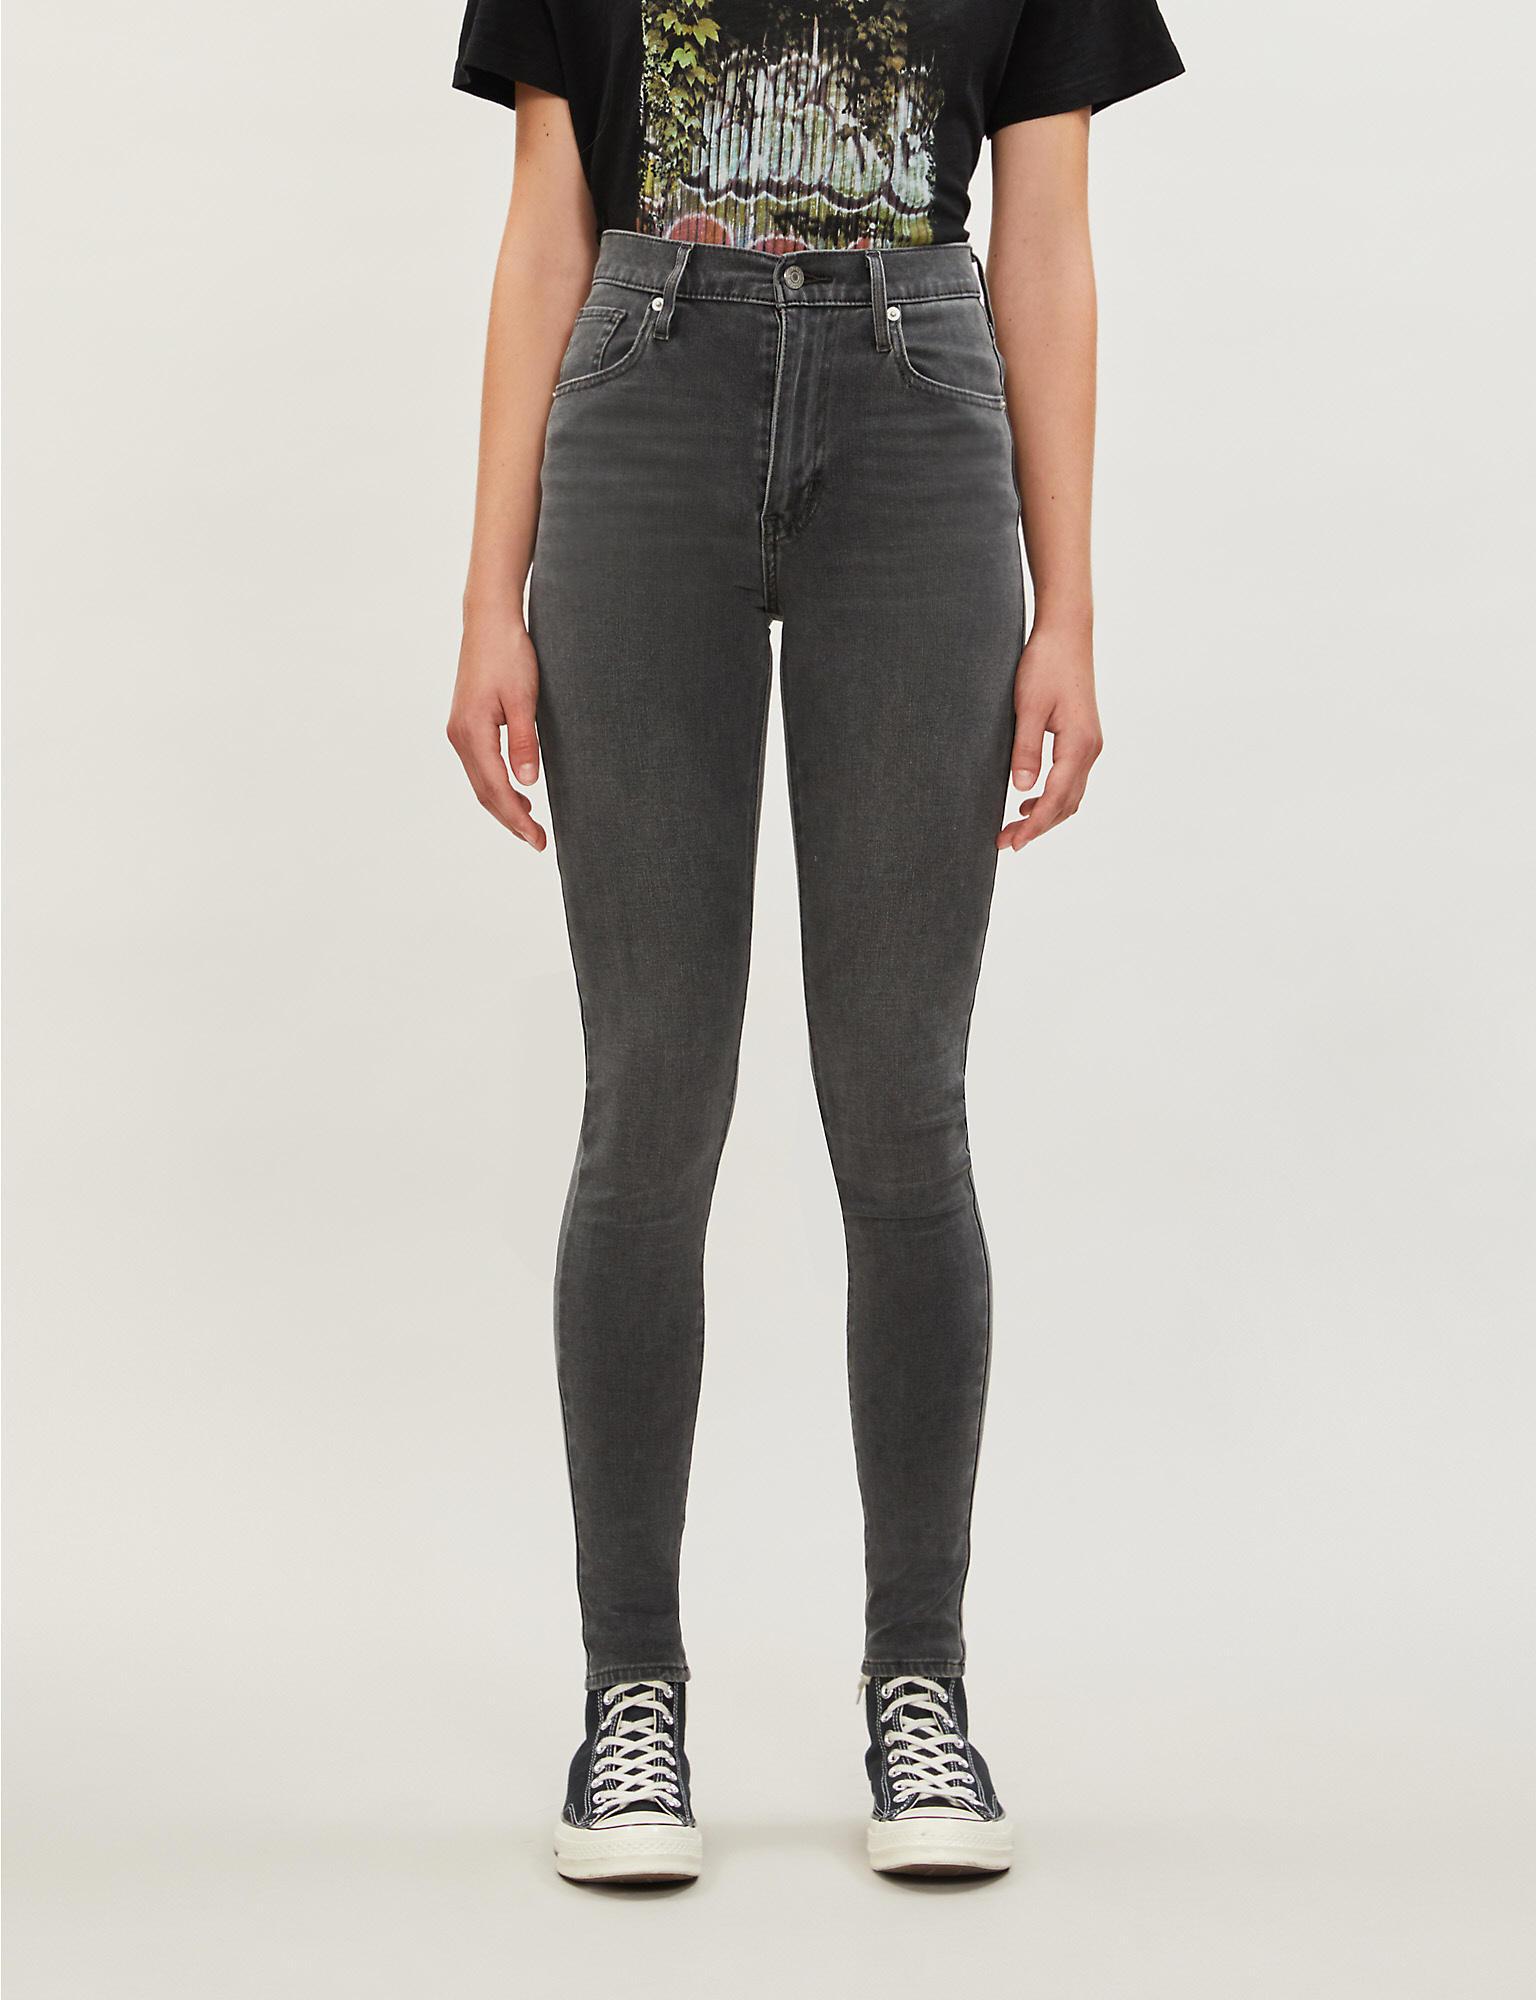 levi's mile high grey Cheaper Than Retail Price> Buy Clothing, Accessories  and lifestyle products for women & men -